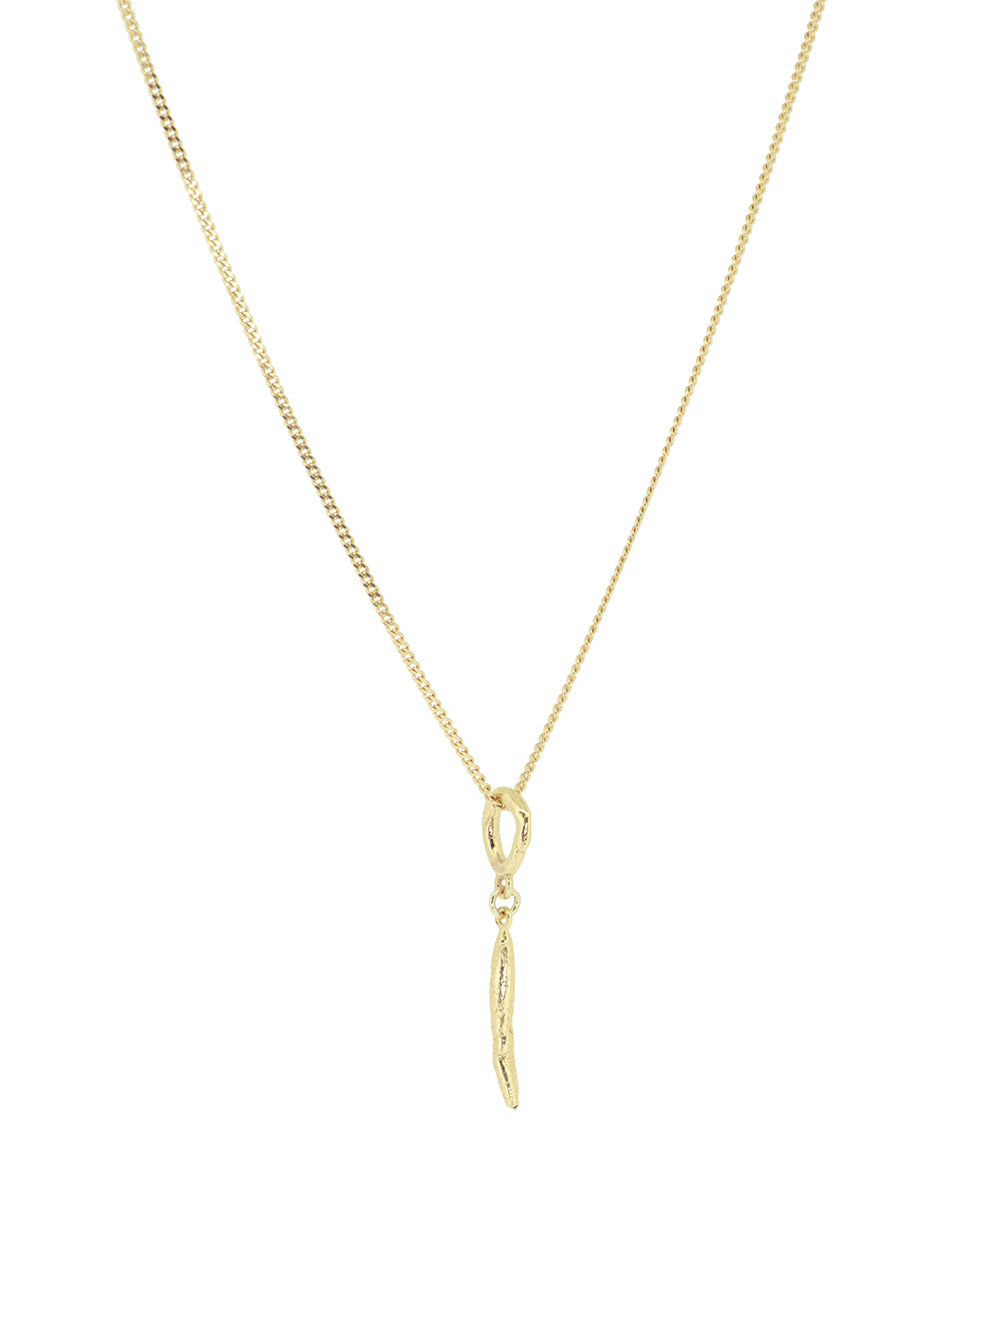 Trust in you | 14K Gold Plated